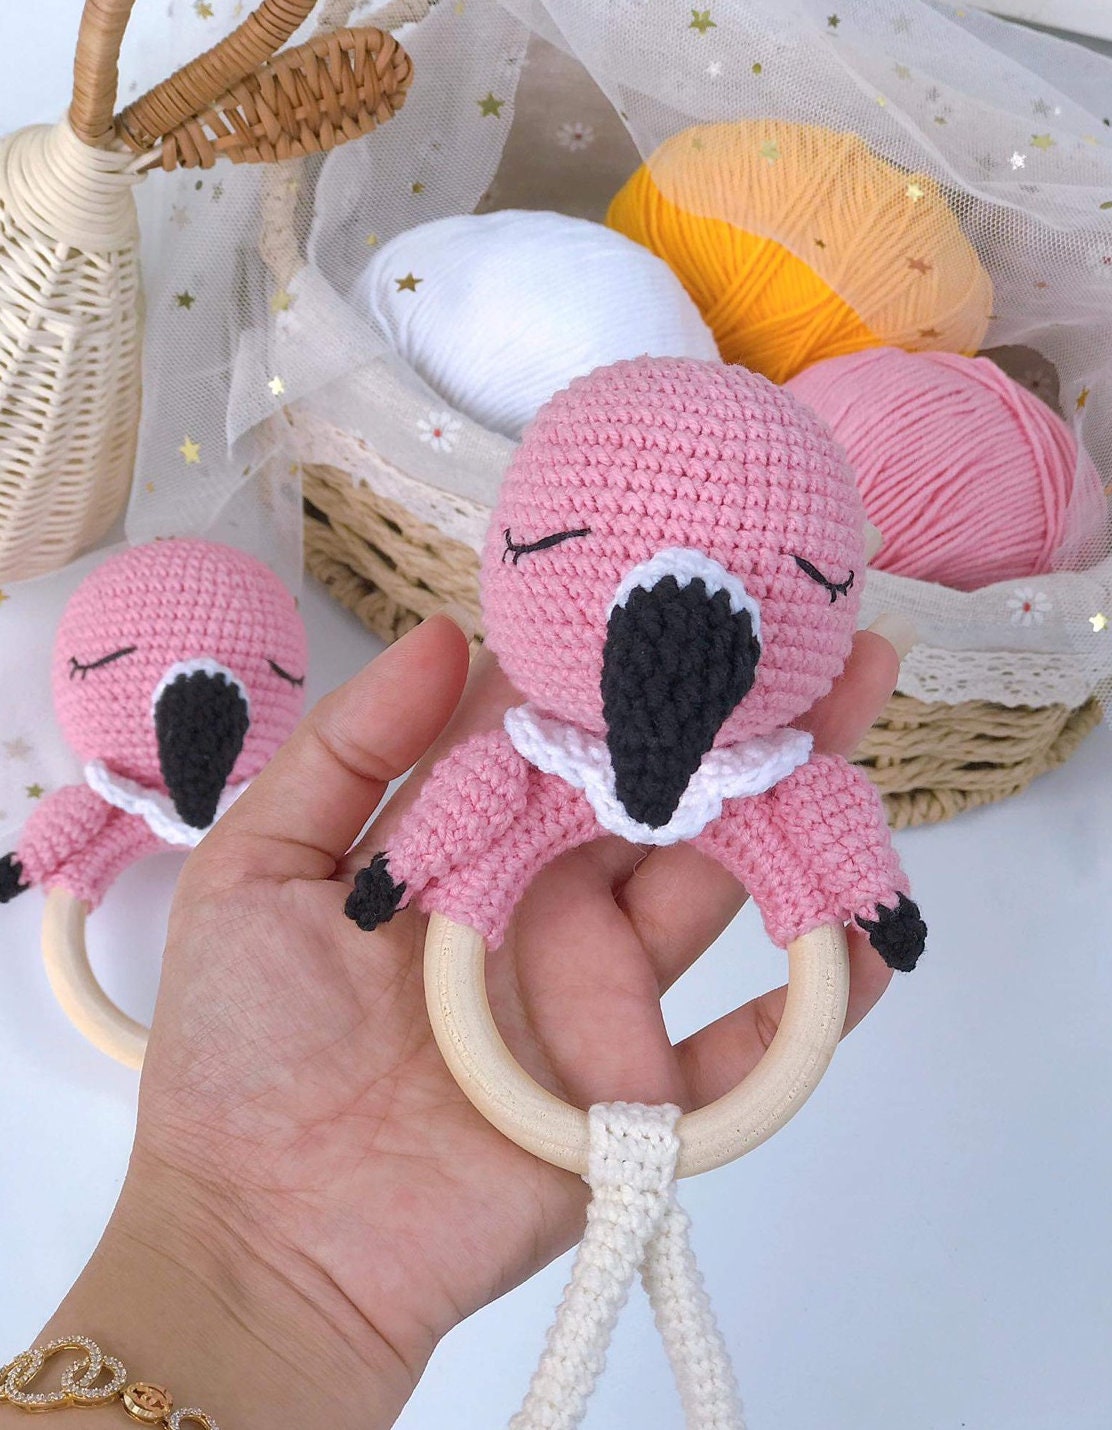 Rio Handmade Personalized Baby Gift, Flamingo Newborn Baby Rattle, Baby Crochet Rattle Gift, Toy Rattle With Name